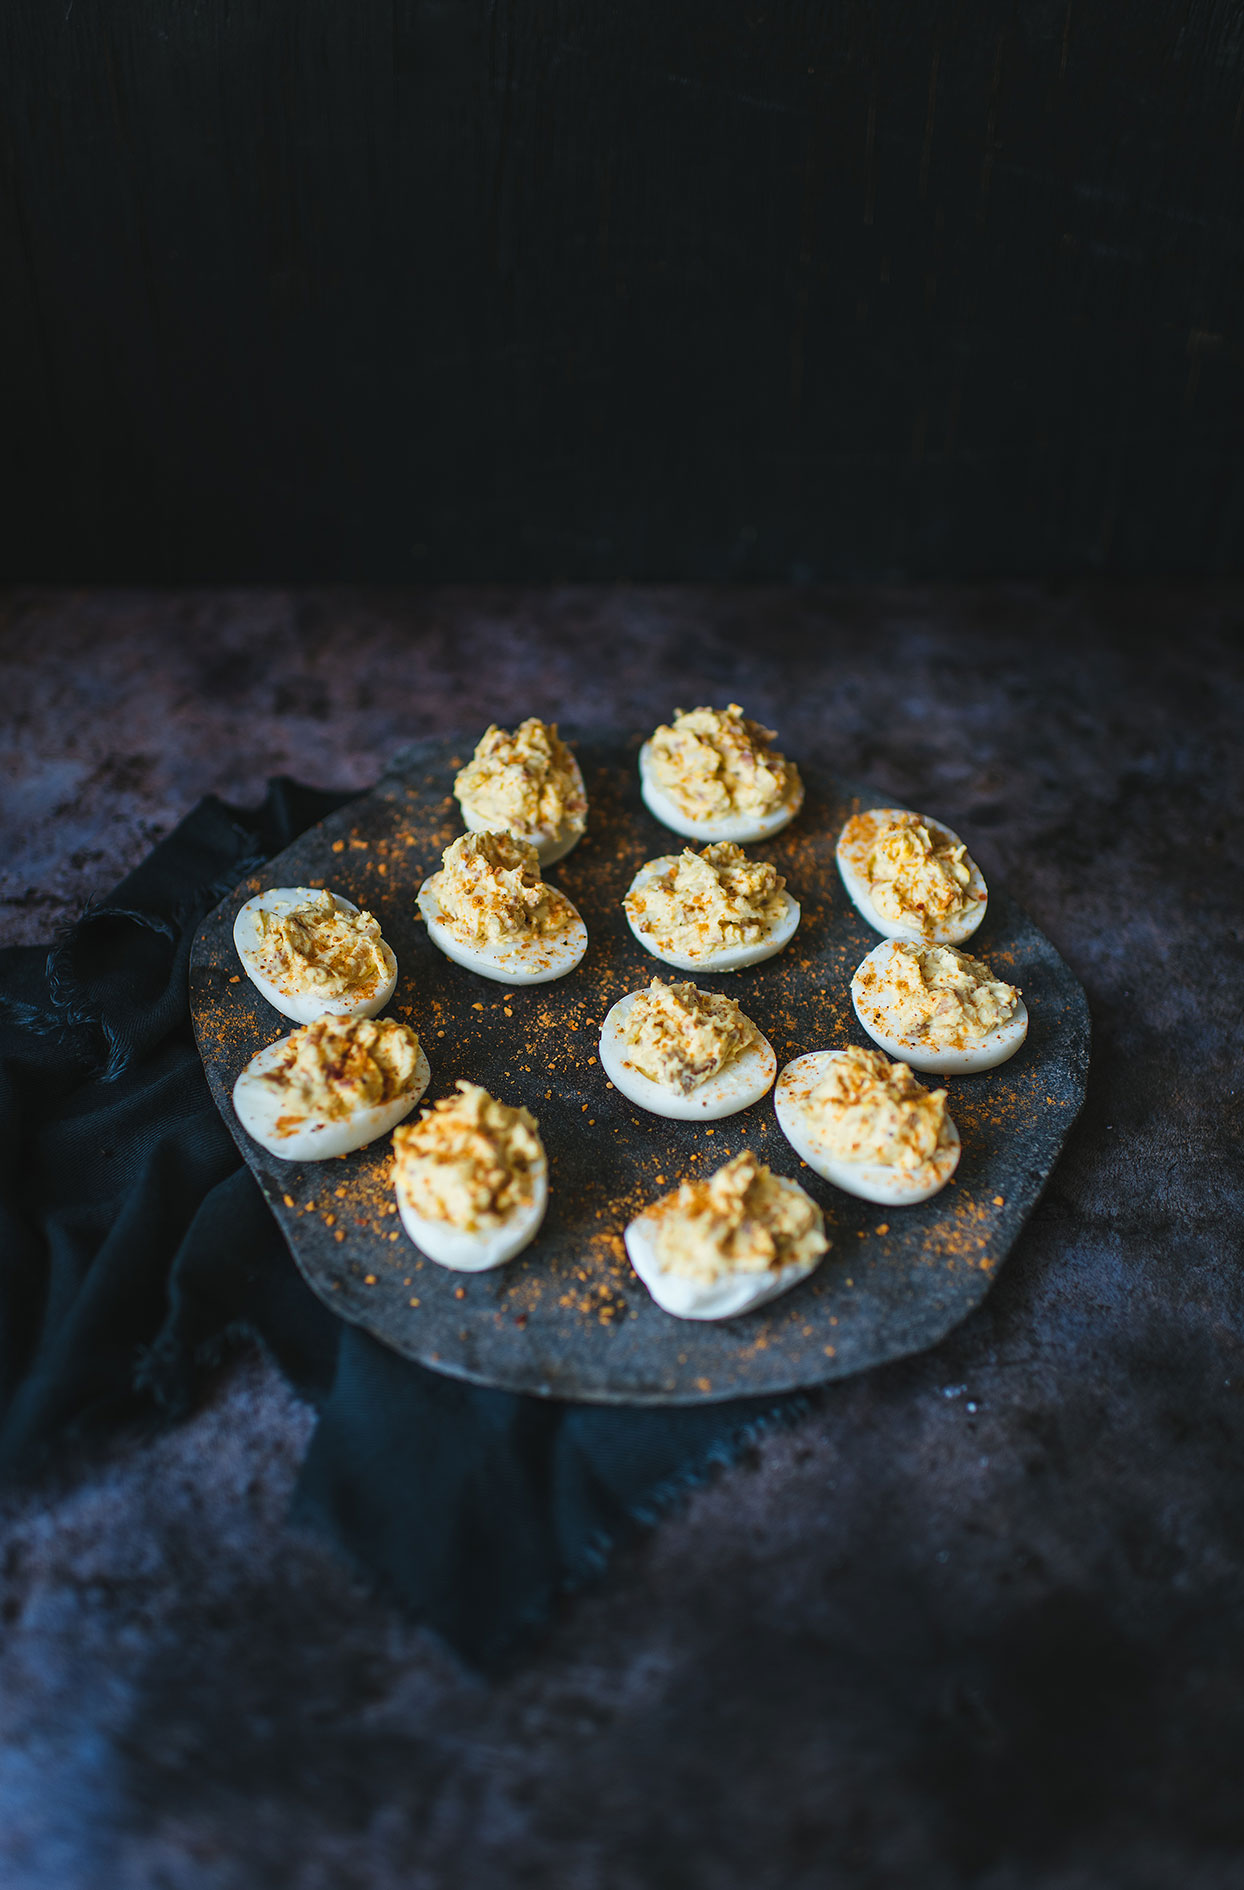 Smoked cheese and bacon deviled eggs